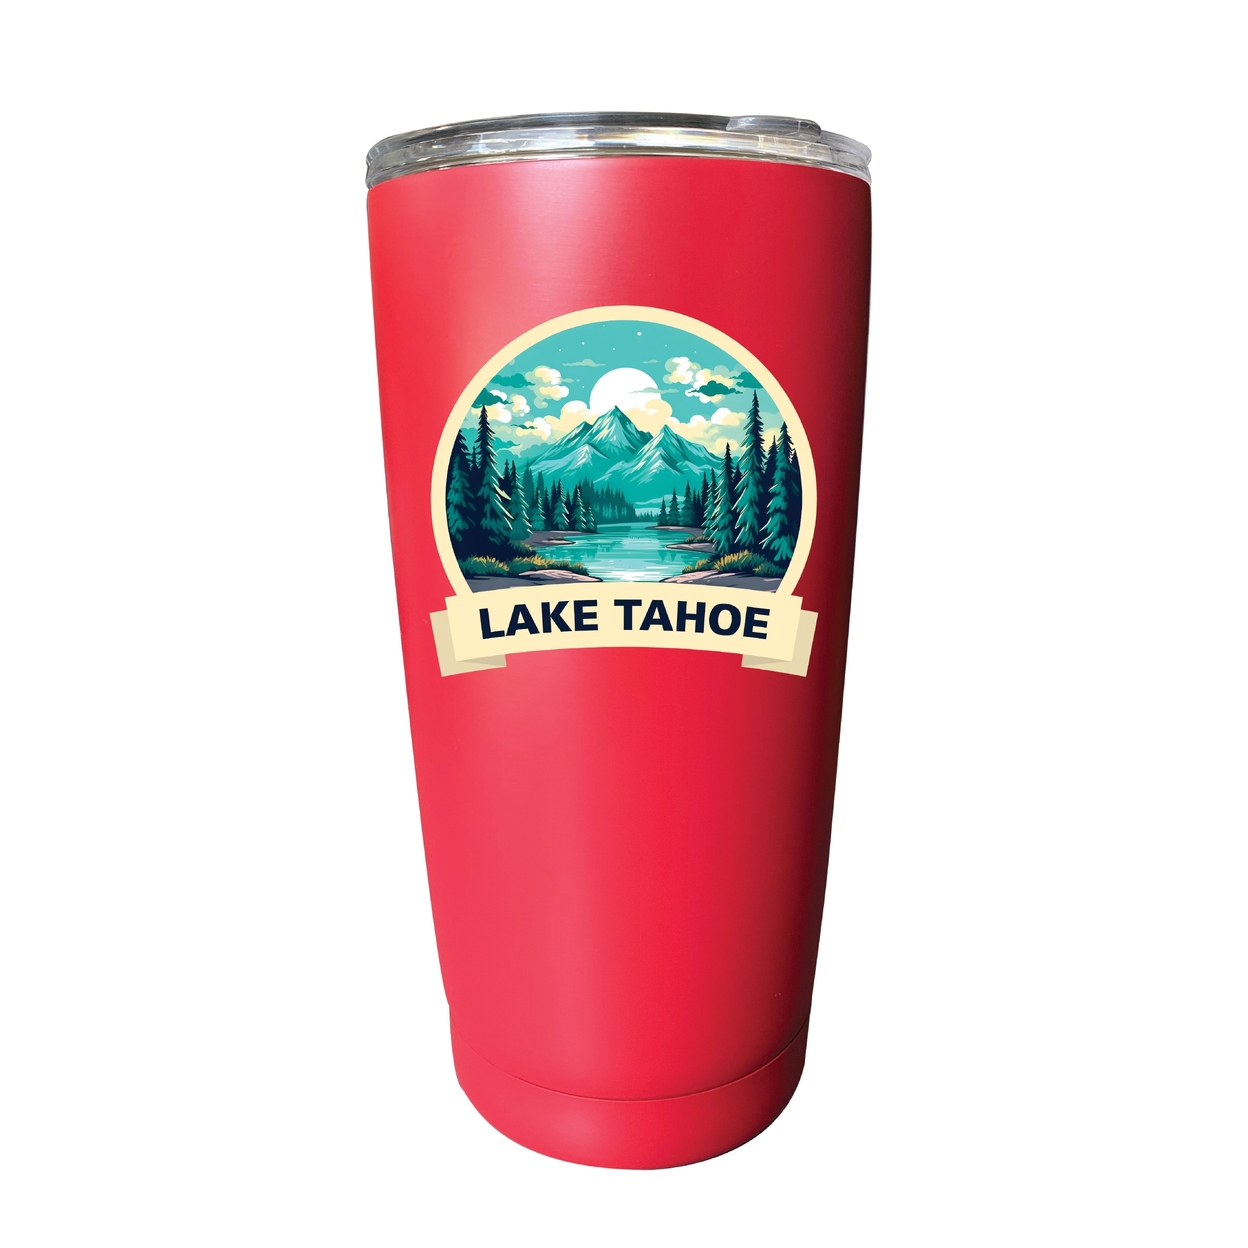 Lake Tahoe California Souvenir 16 Oz Stainless Steel Insulated Tumbler - Stainless Steel,,4-Pack